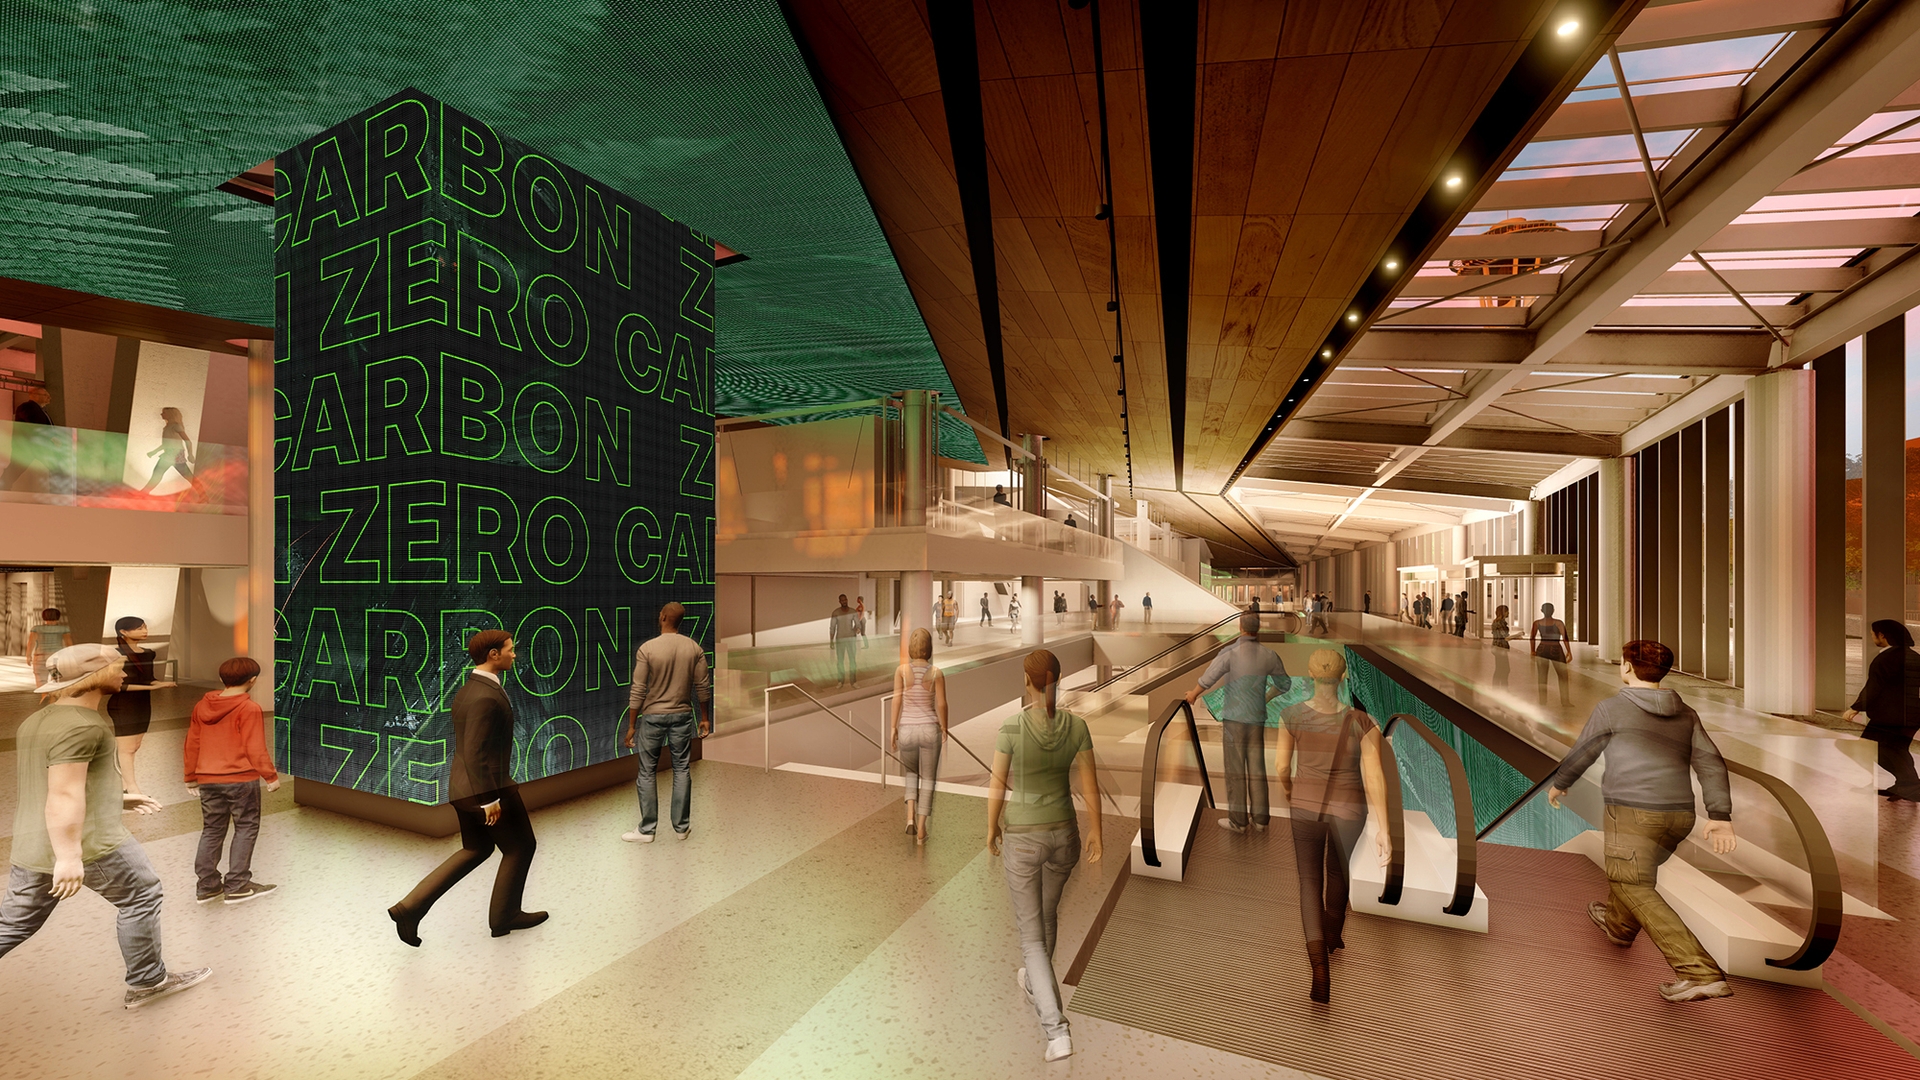 Rendering of the new Climate Pledge Arena in Seattle, Washington